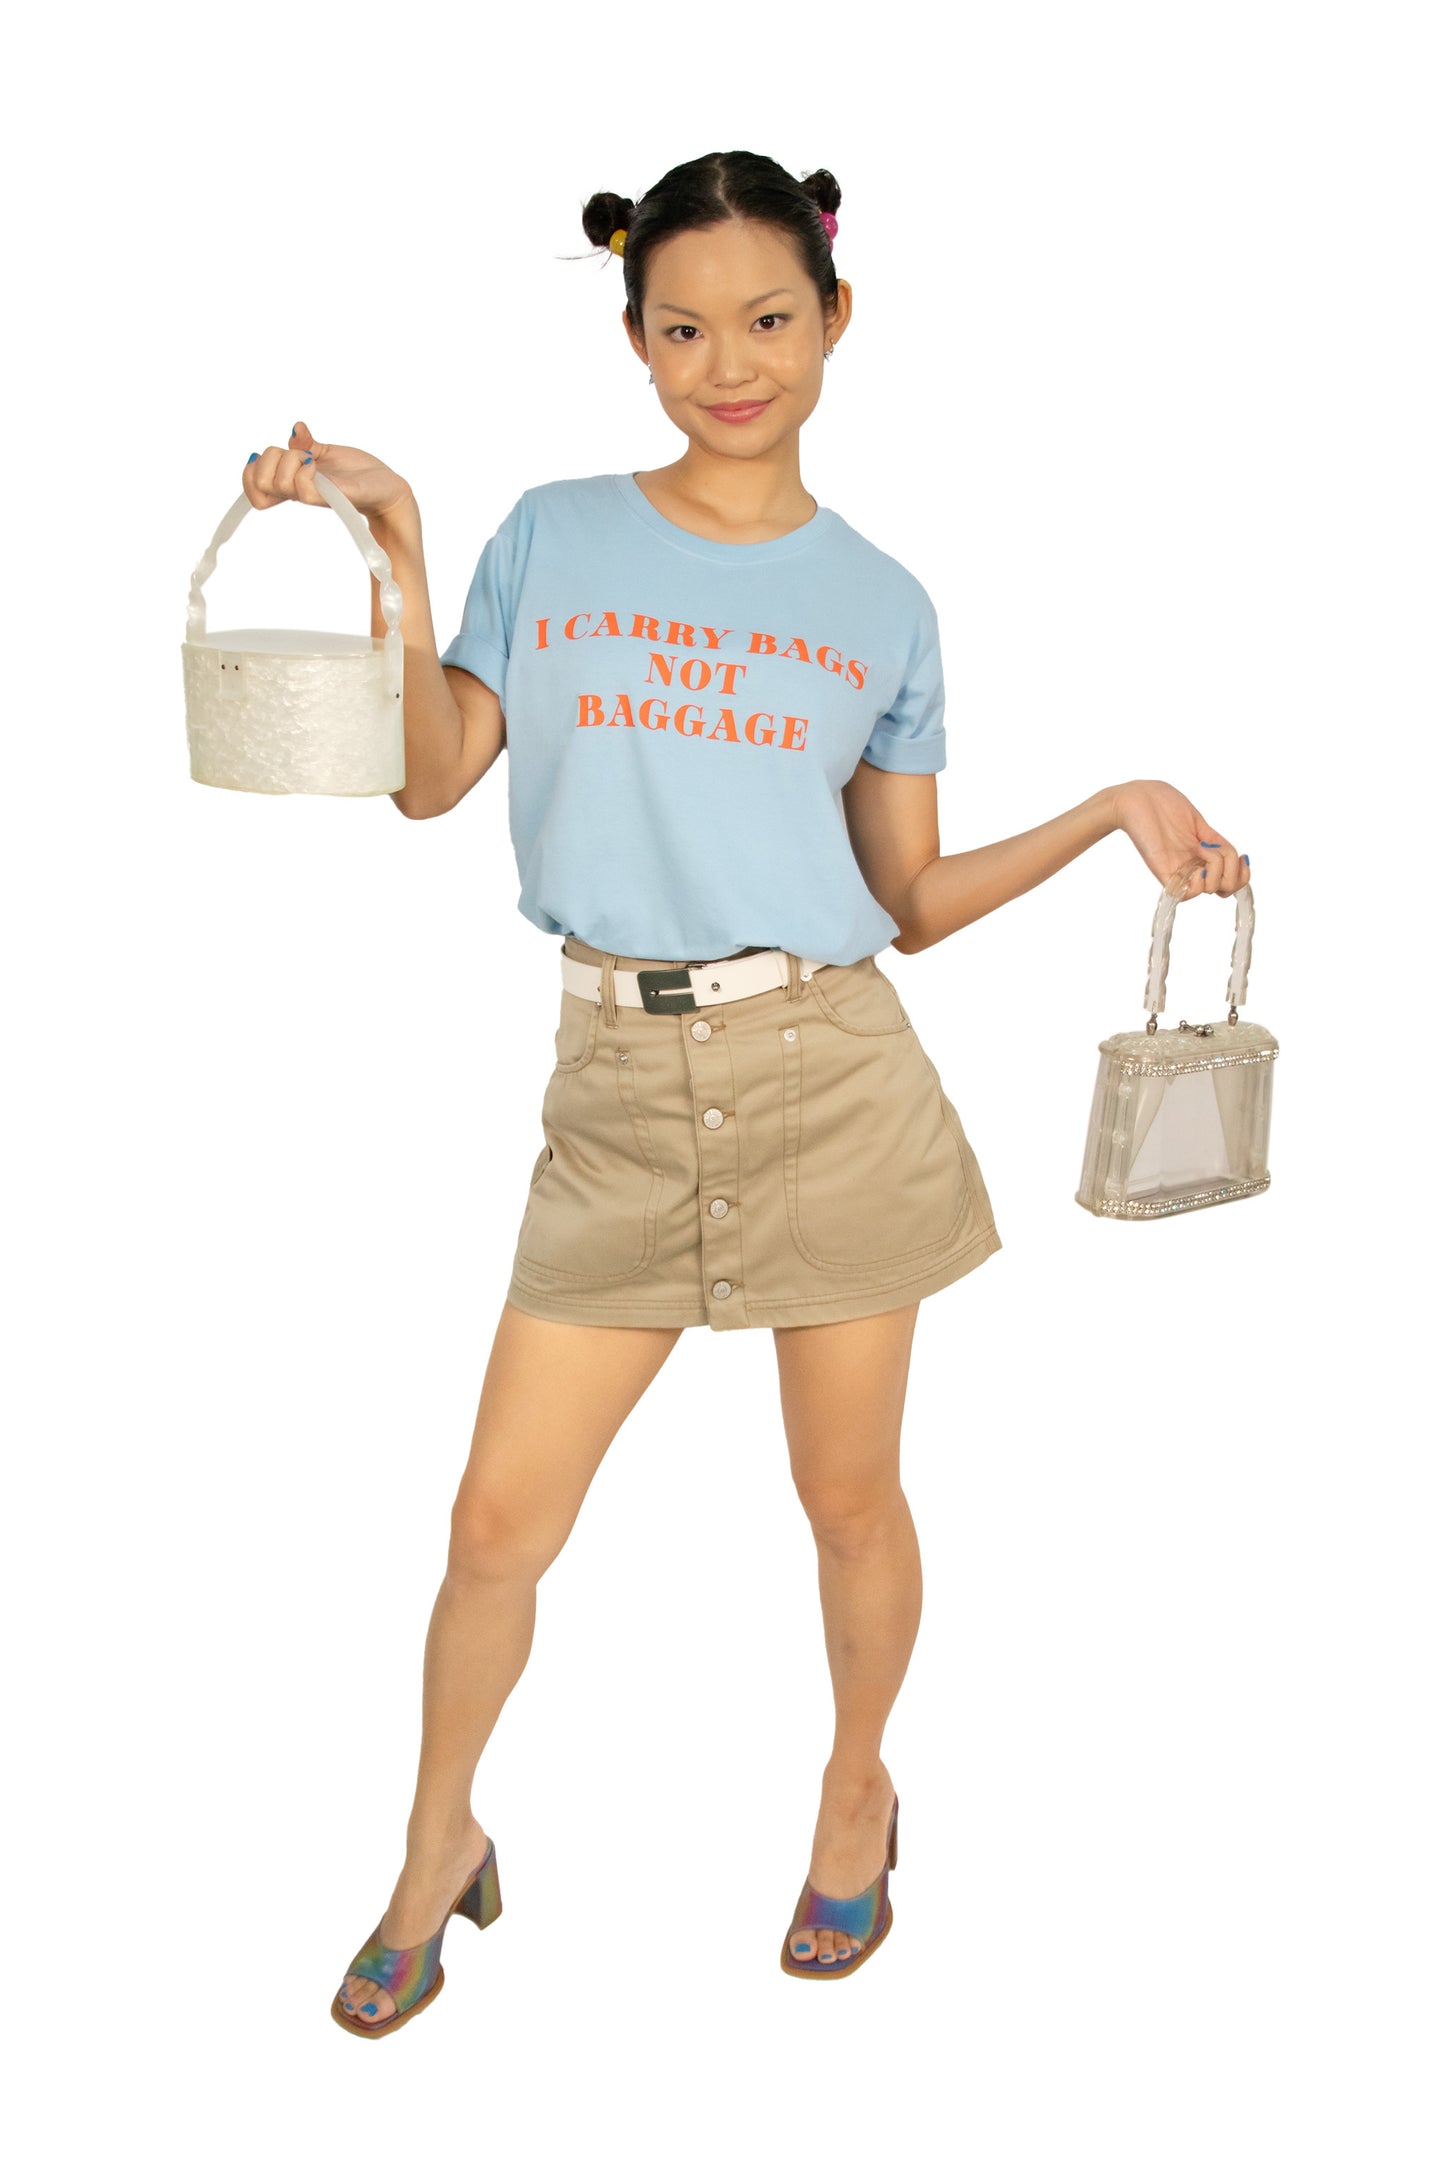 I CARRY BAGS NOT BAGGAGE Tee